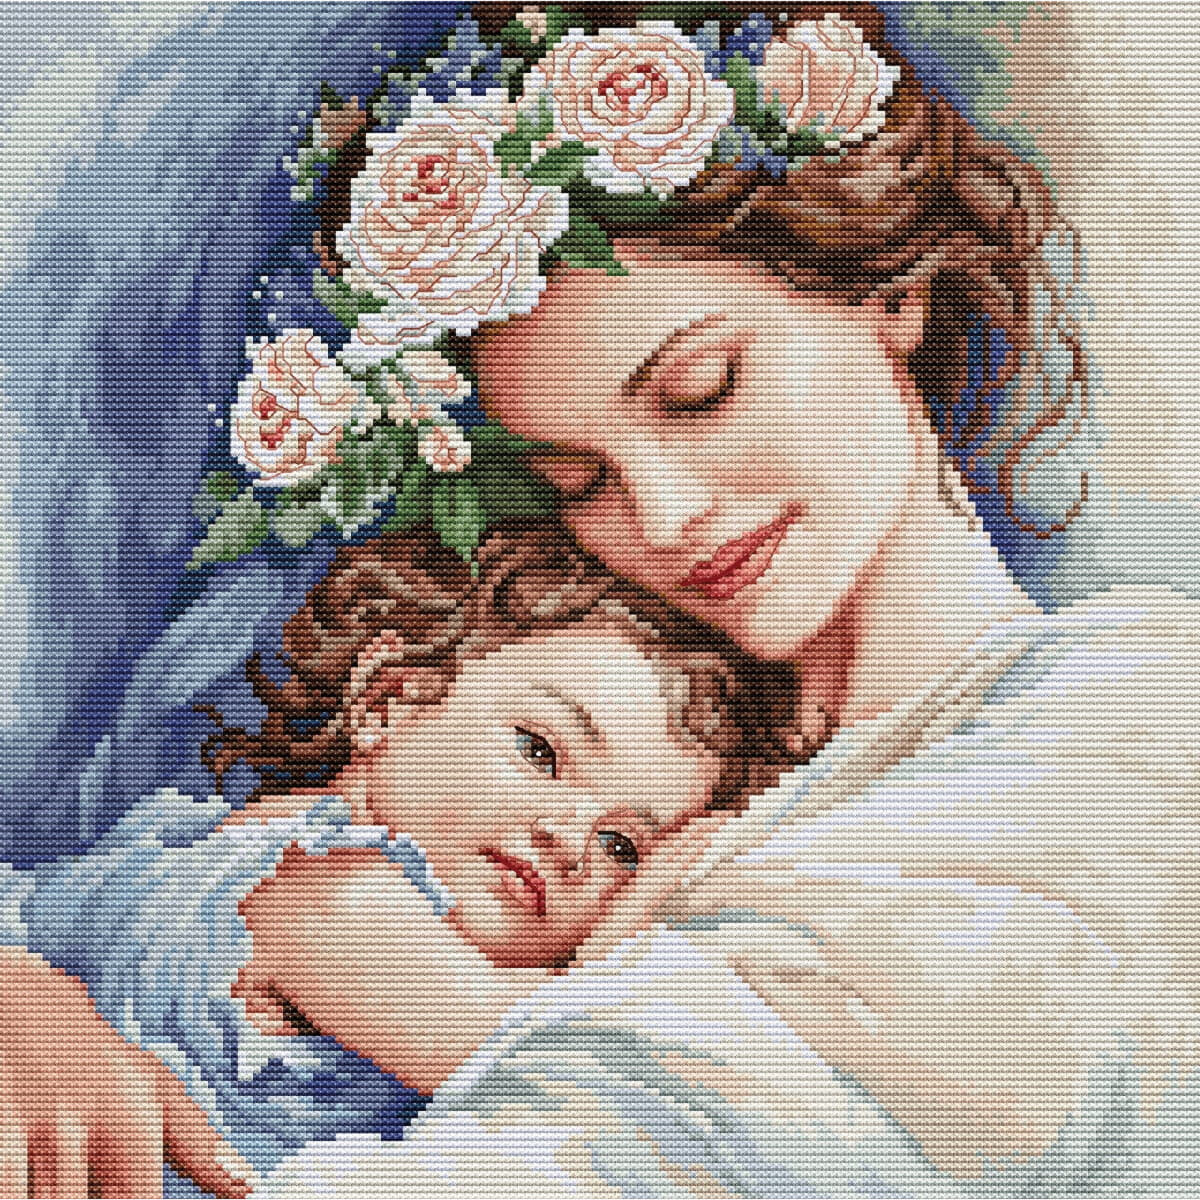 A Luca-s embroidery pack with a cheerful, hugging mother...